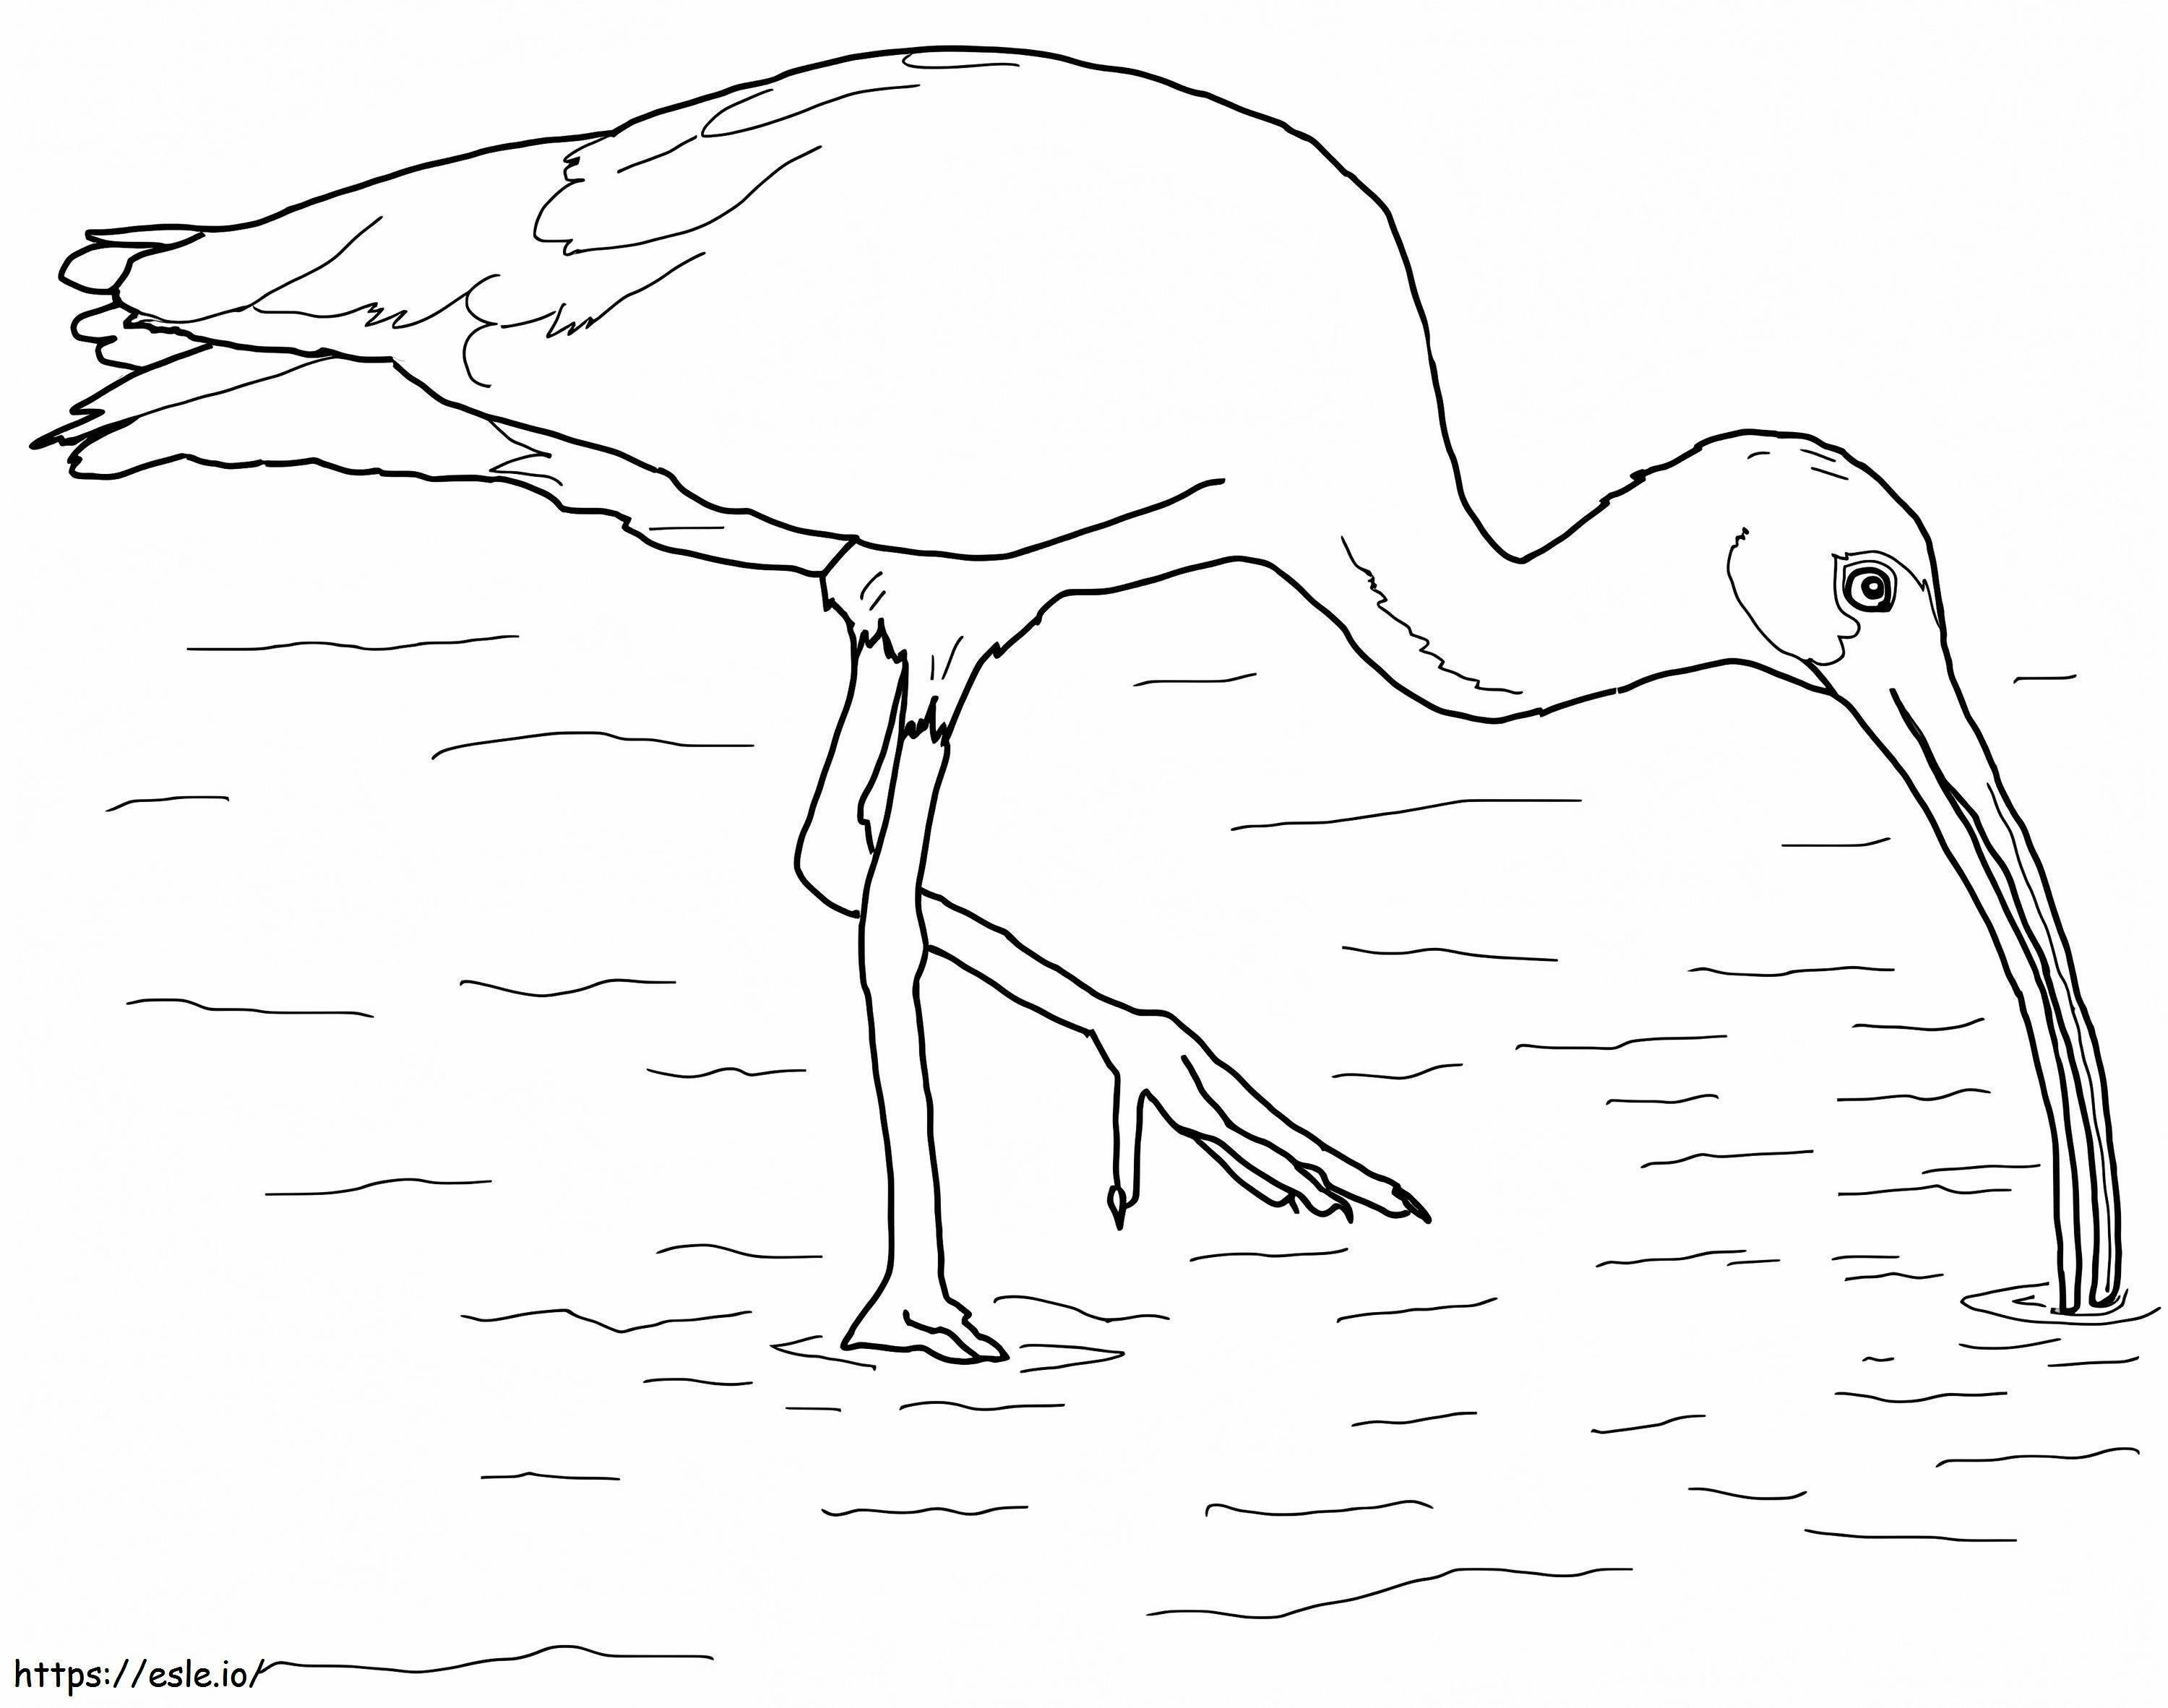 White Ibis coloring page